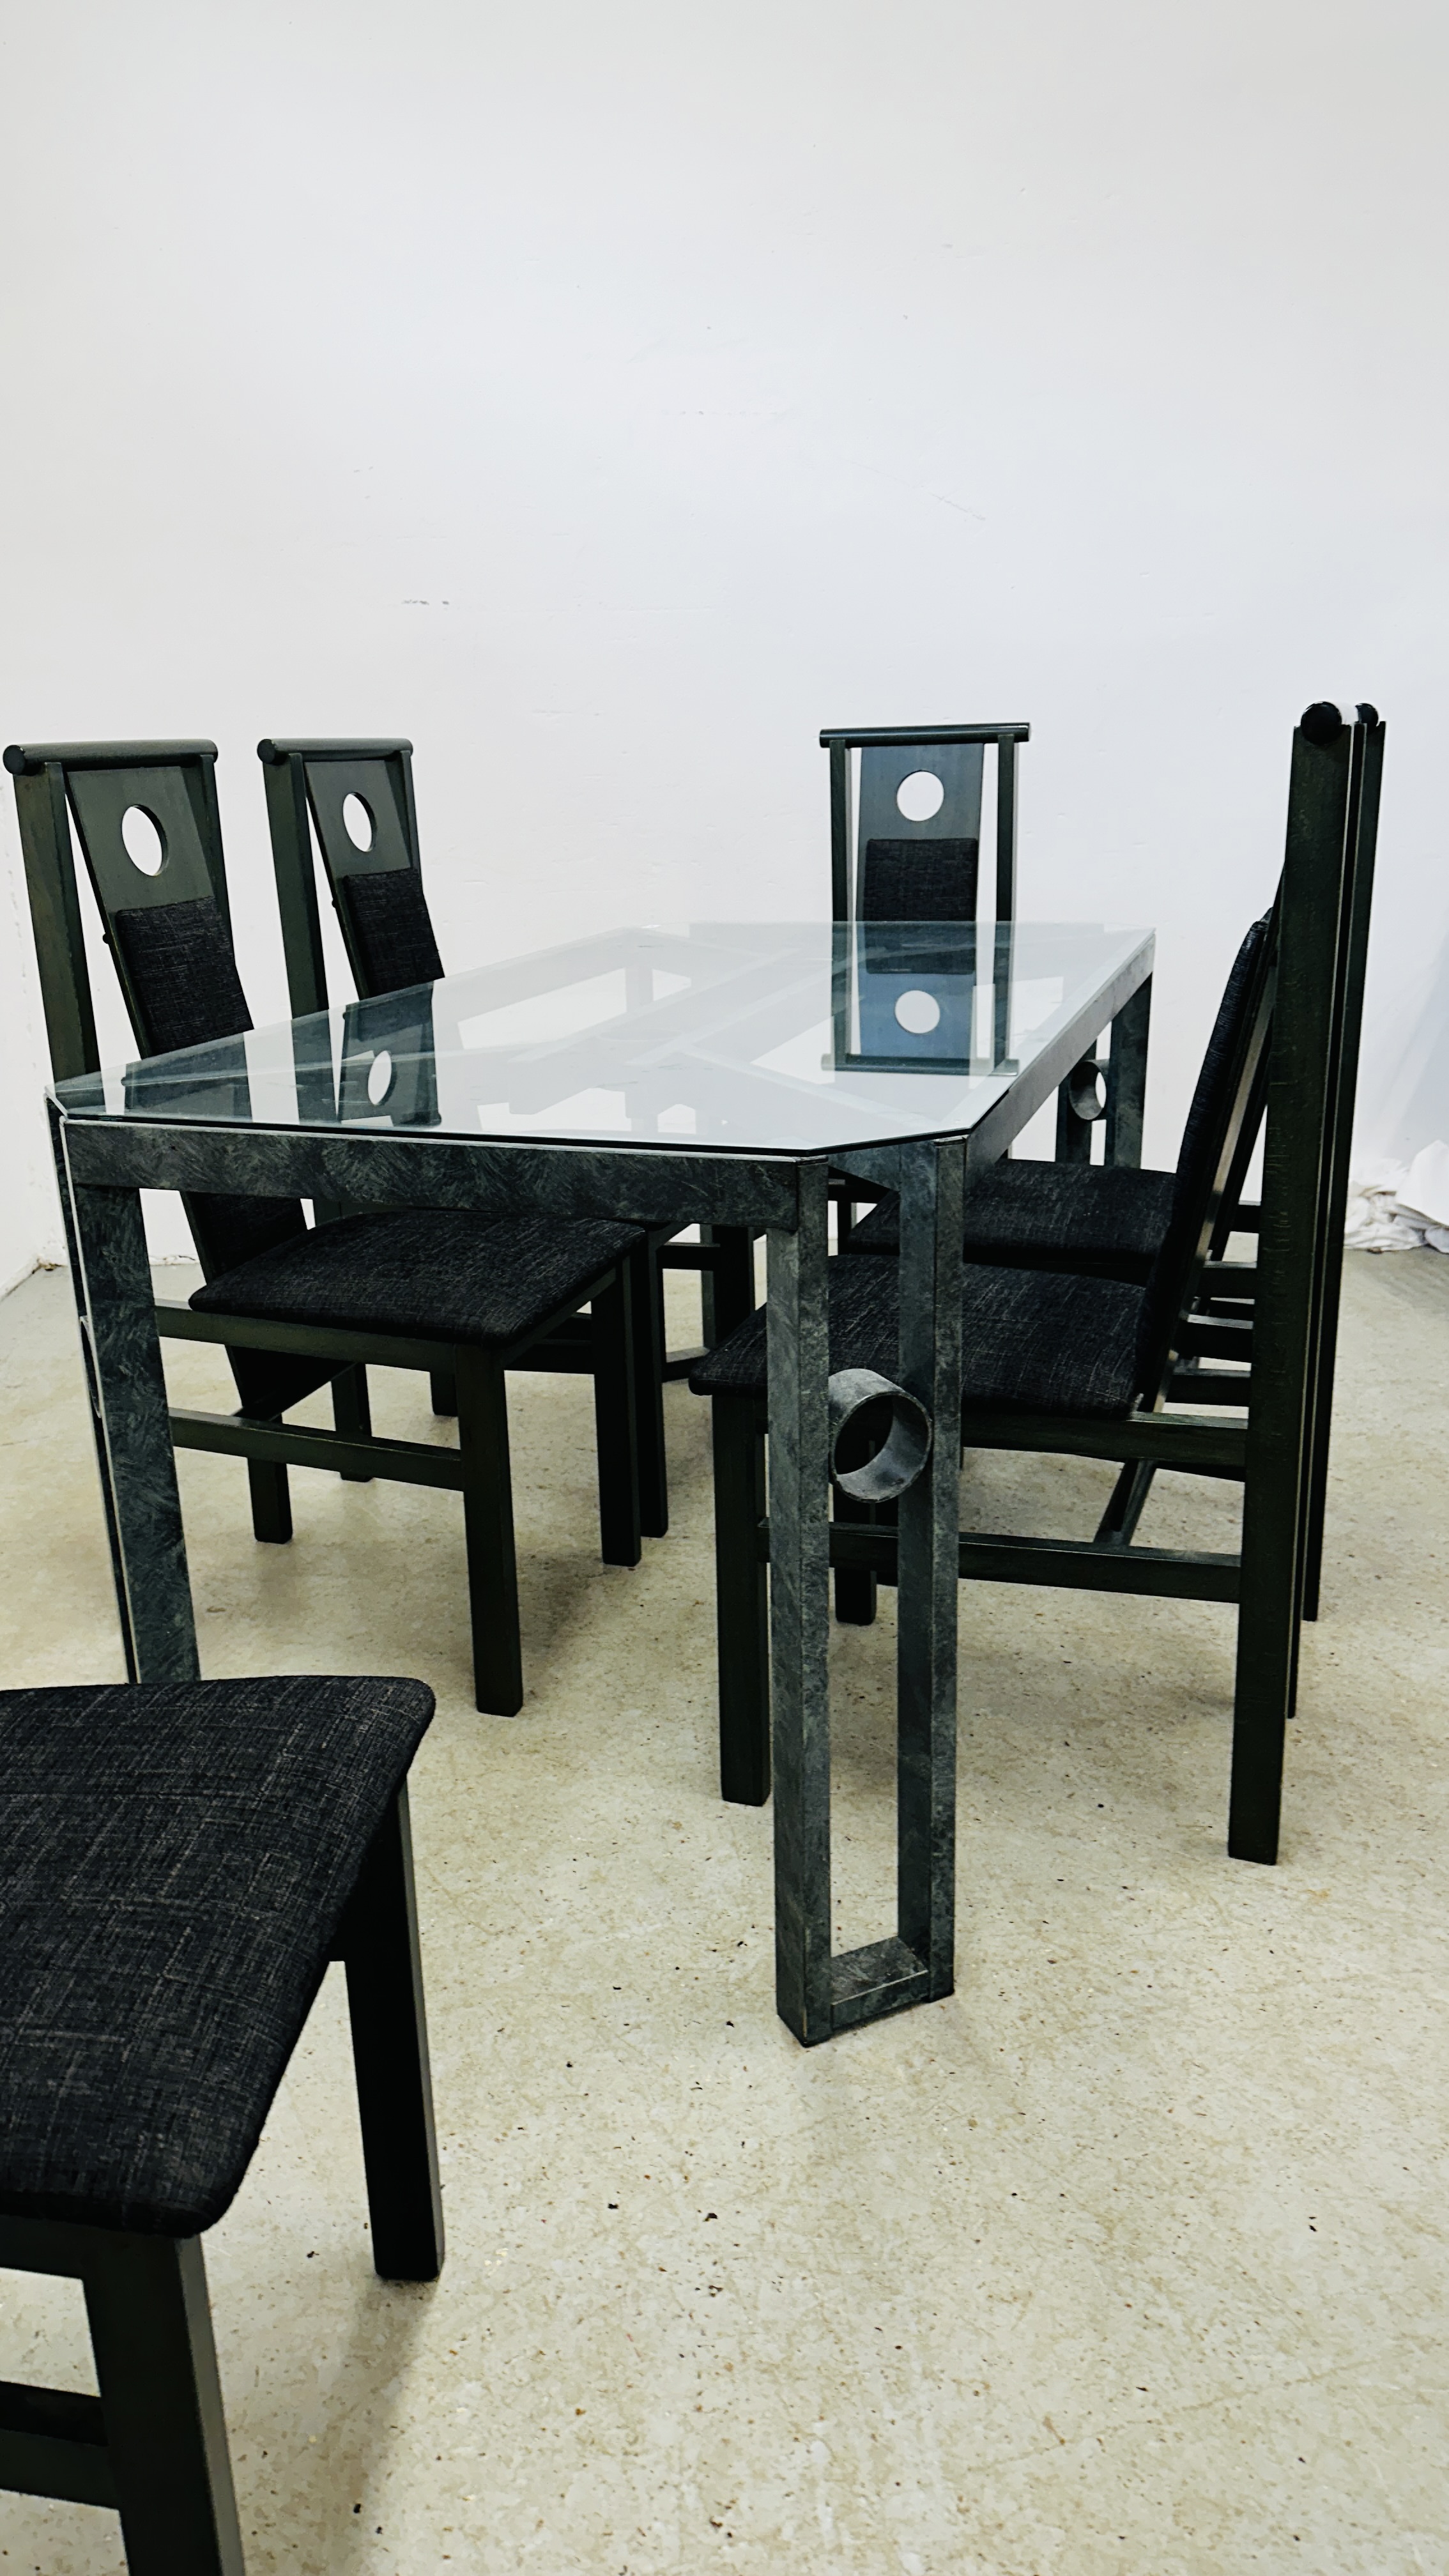 A DESIGNER MODERN METAL CRAFT DINING TABLE WITH GLASS TOP 155CM X 80CM ACCOMPANIED BY A SET OF SIX - Bild 11 aus 14